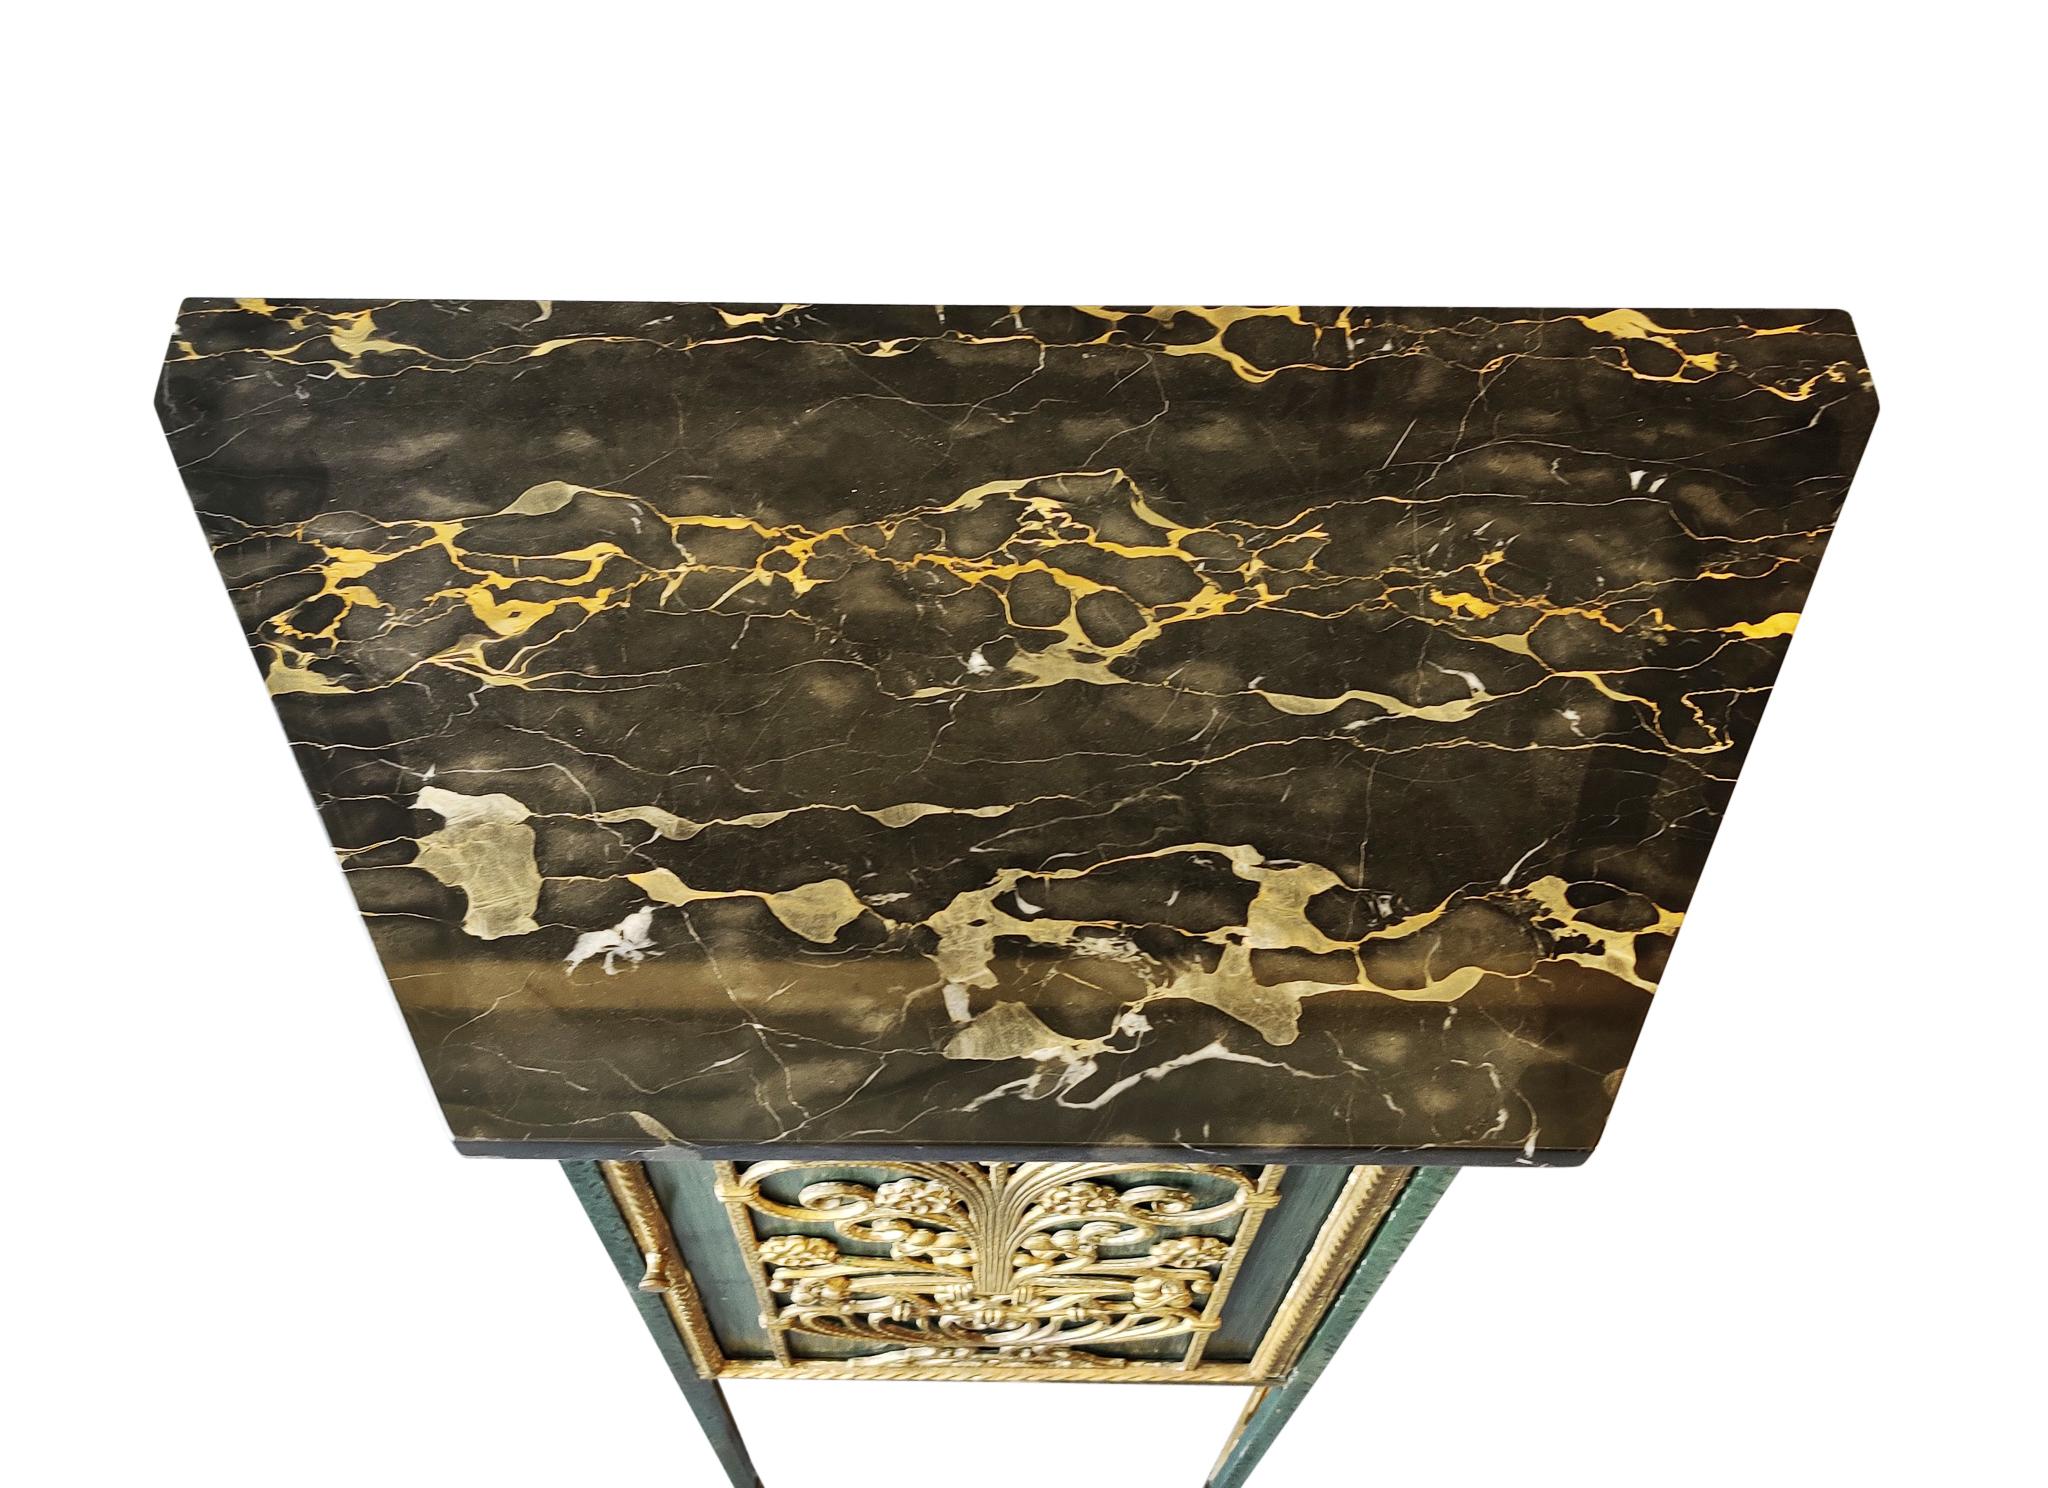 A unique bronze, iron and marble telephone stand (better use today is a bar cabinet) Attributed to New York Designer and Manufacturer, Oscar Bach. Stand has an marble top with a heavy veining and a bright finish. The door in the front has ornate